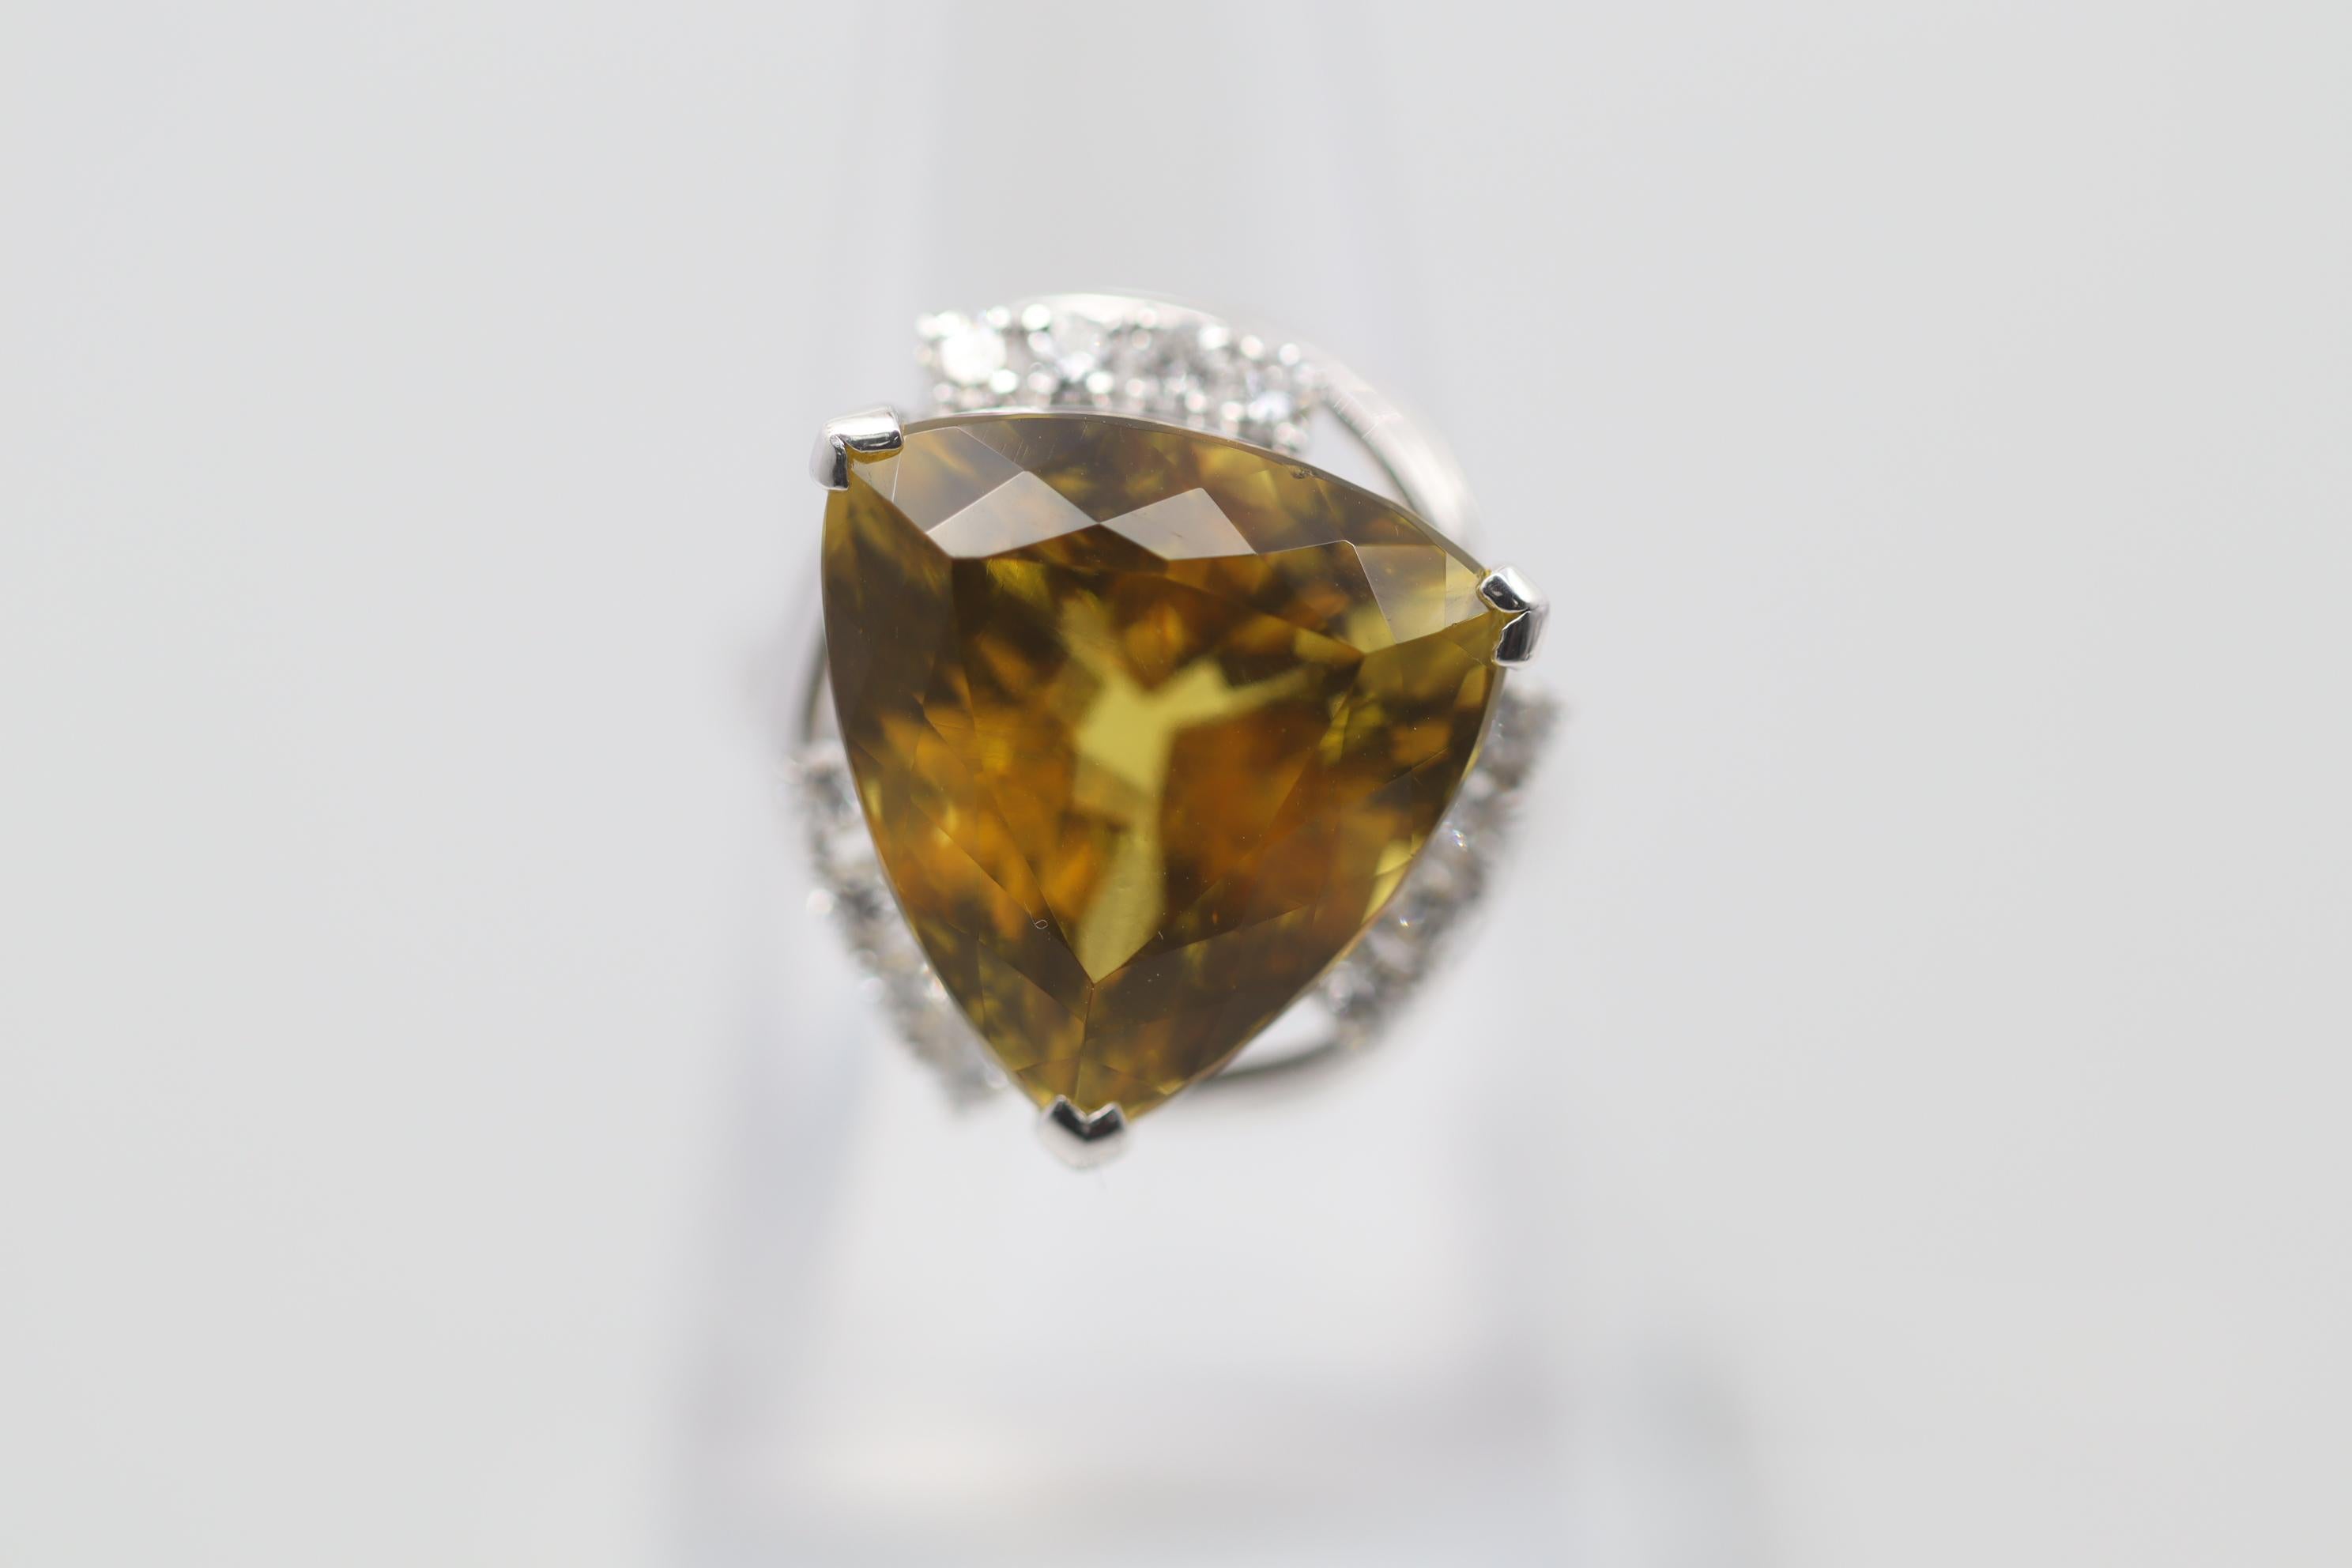 A stylish ring featuring a unique gemstone, a golden yellow beryl, which is in the same family as emerald (green beryl) and morganite (pink beryl). It weighs 14.93 carats and is shaped as a triangular brilliant-cut which gives the stone excellent